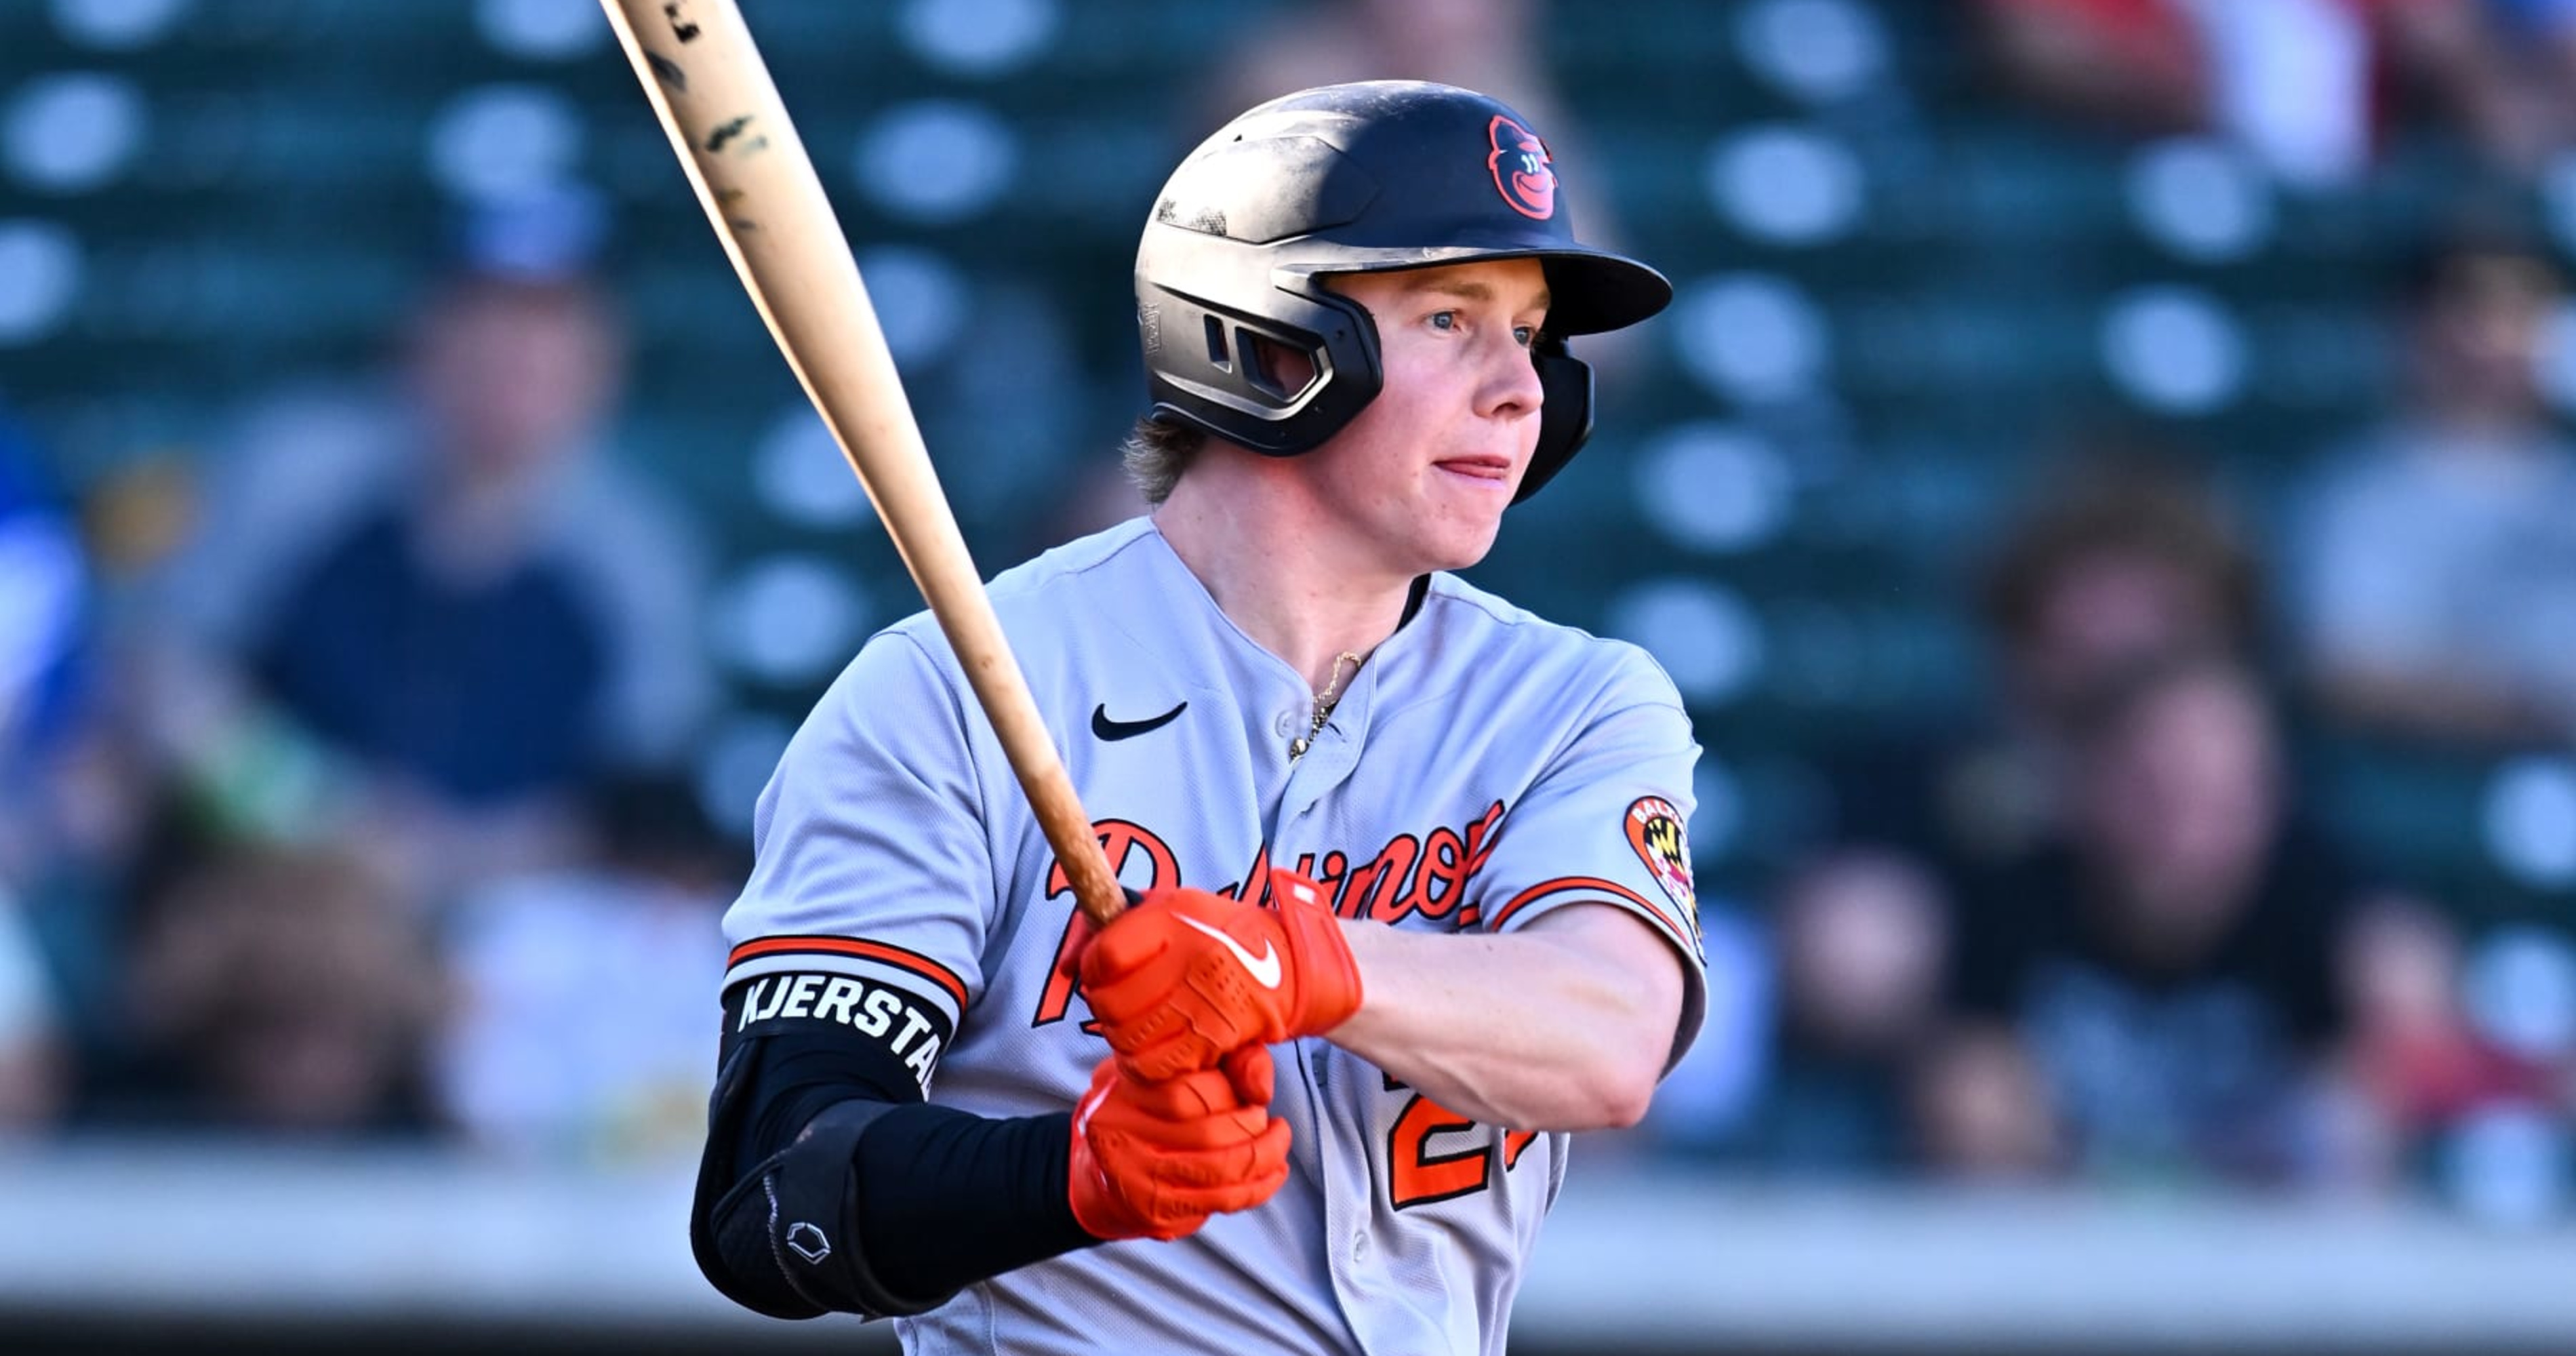 7 MLB Top Prospects Still Primed to Make Their MLB Debuts in 2023